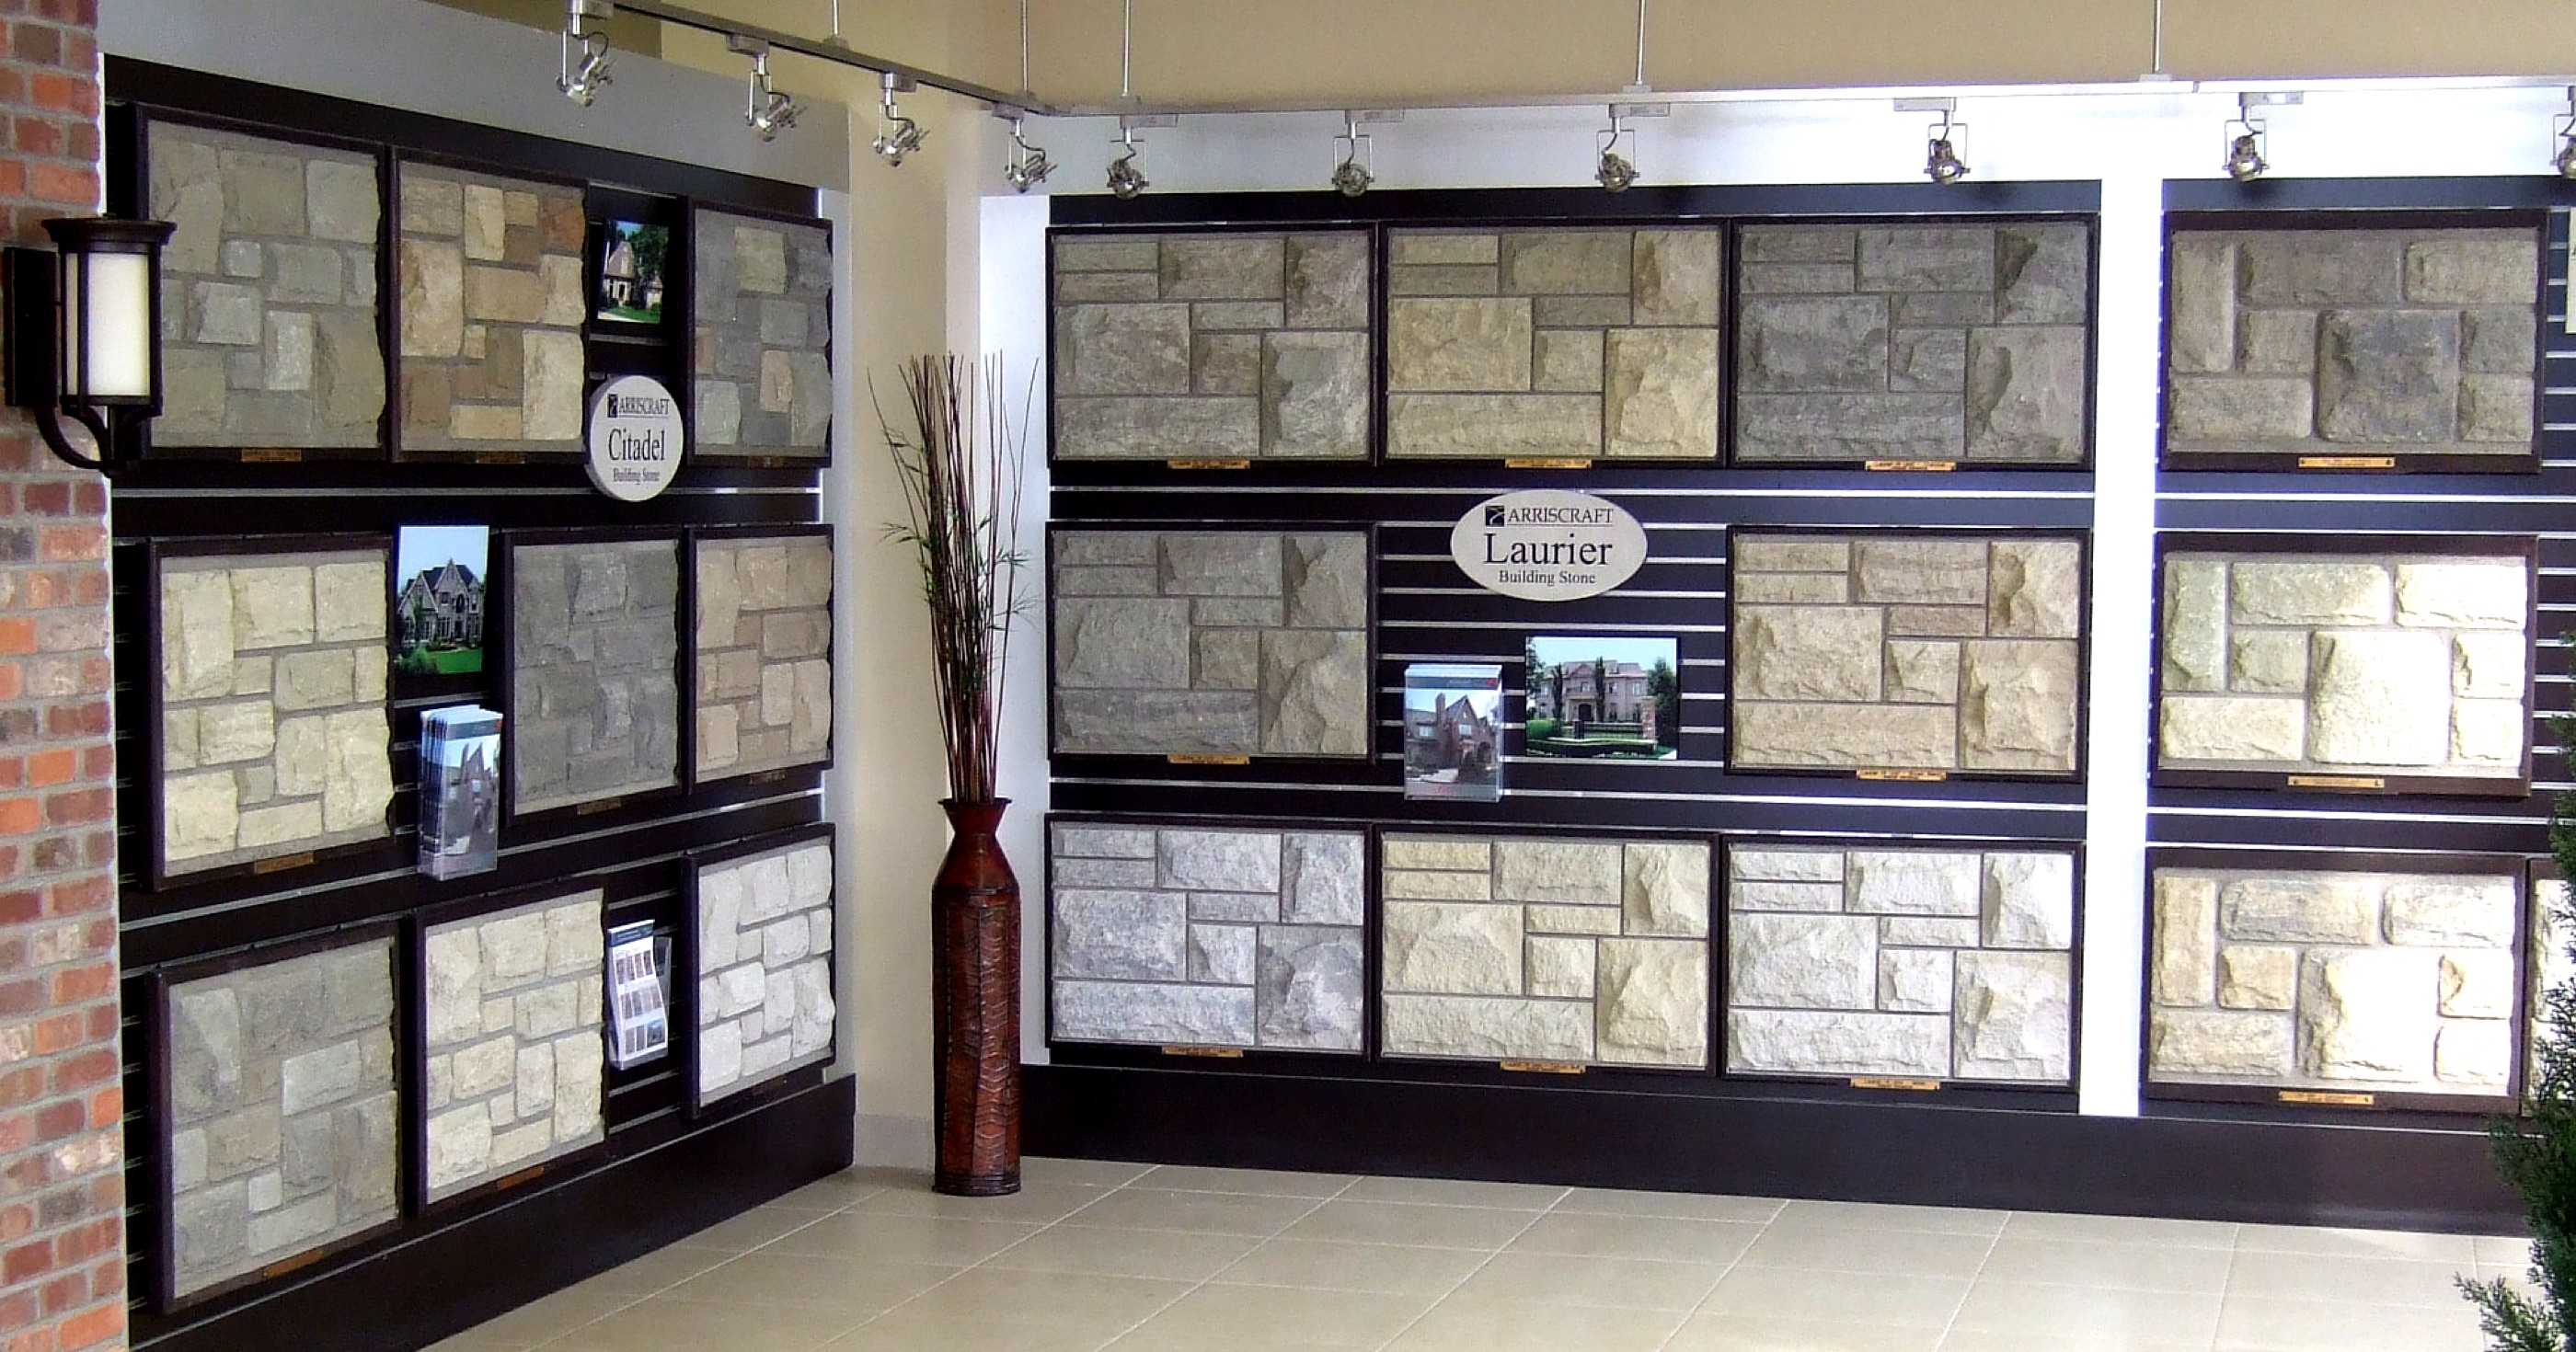 Visit Our Showroom!